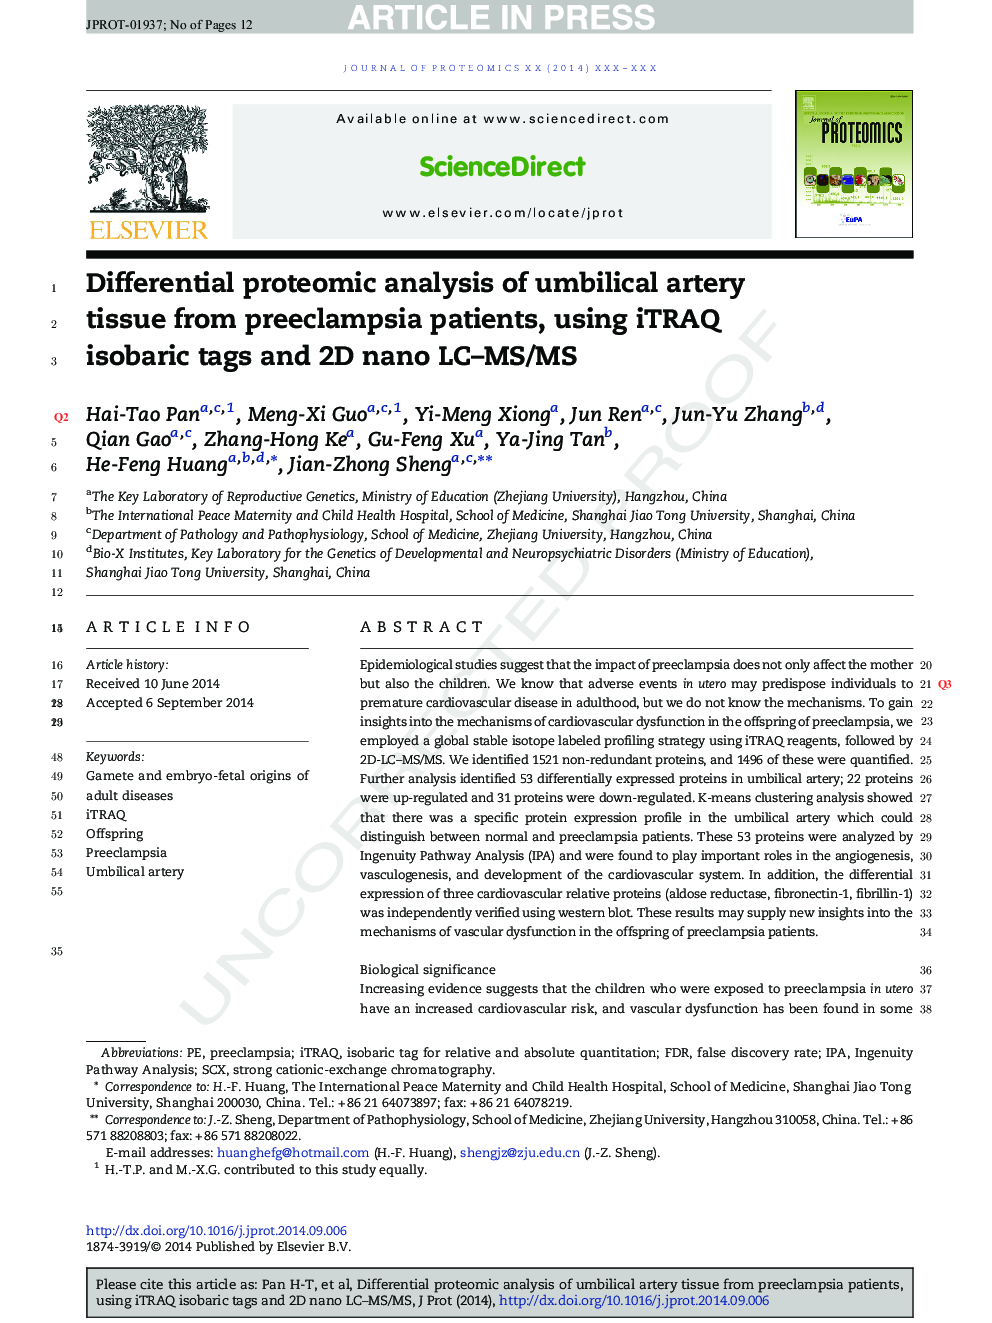 Differential proteomic analysis of umbilical artery tissue from preeclampsia patients, using iTRAQ isobaric tags and 2D nano LC-MS/MS